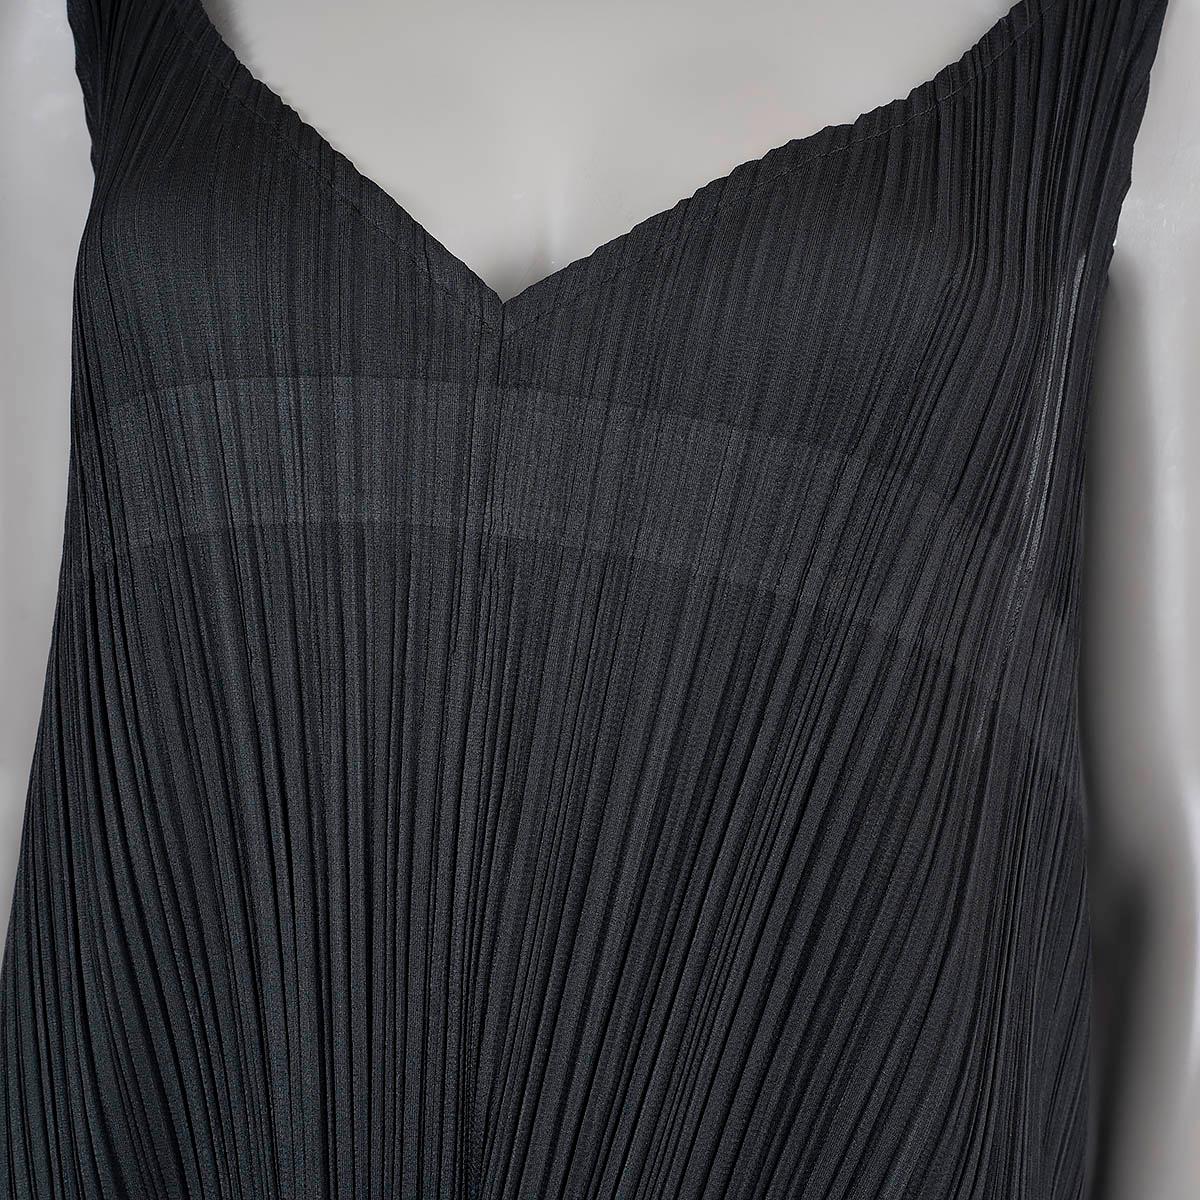 ISSEY MIYAKE PLEATS PLEASE black PLEATED SLEEVELESS TIE-BACK Dress 5 XL In Excellent Condition For Sale In Zürich, CH